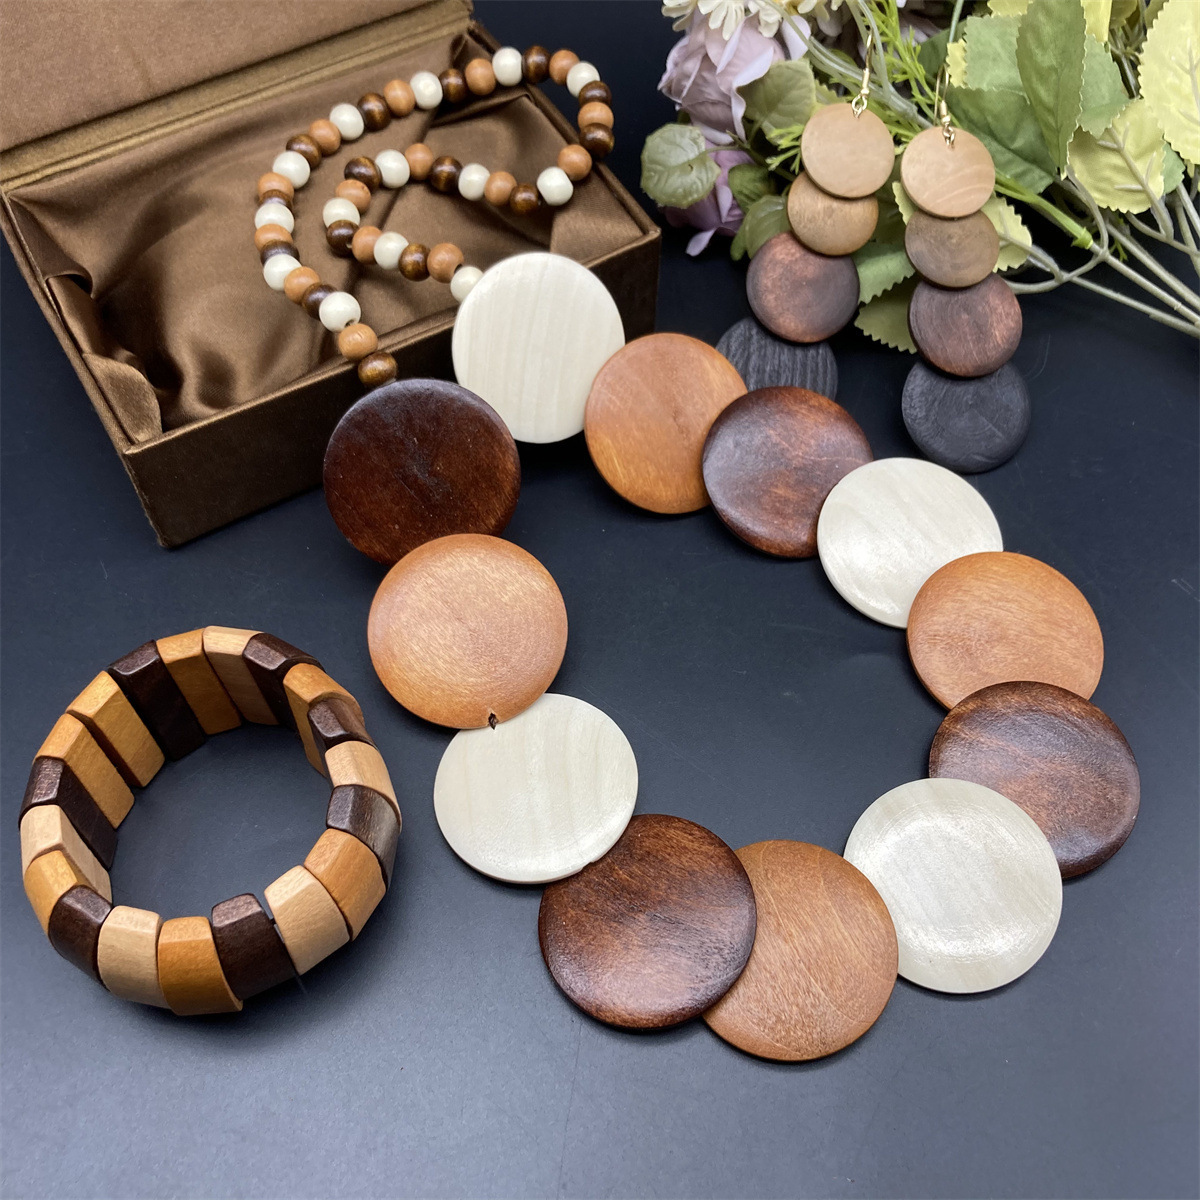 

Rustic Bohemian 3-piece Jewelry Set, Vintage Wooden Necklace, Earrings, And Bracelet Combo, Ethnic Style Wooden Accessory Kit For Women